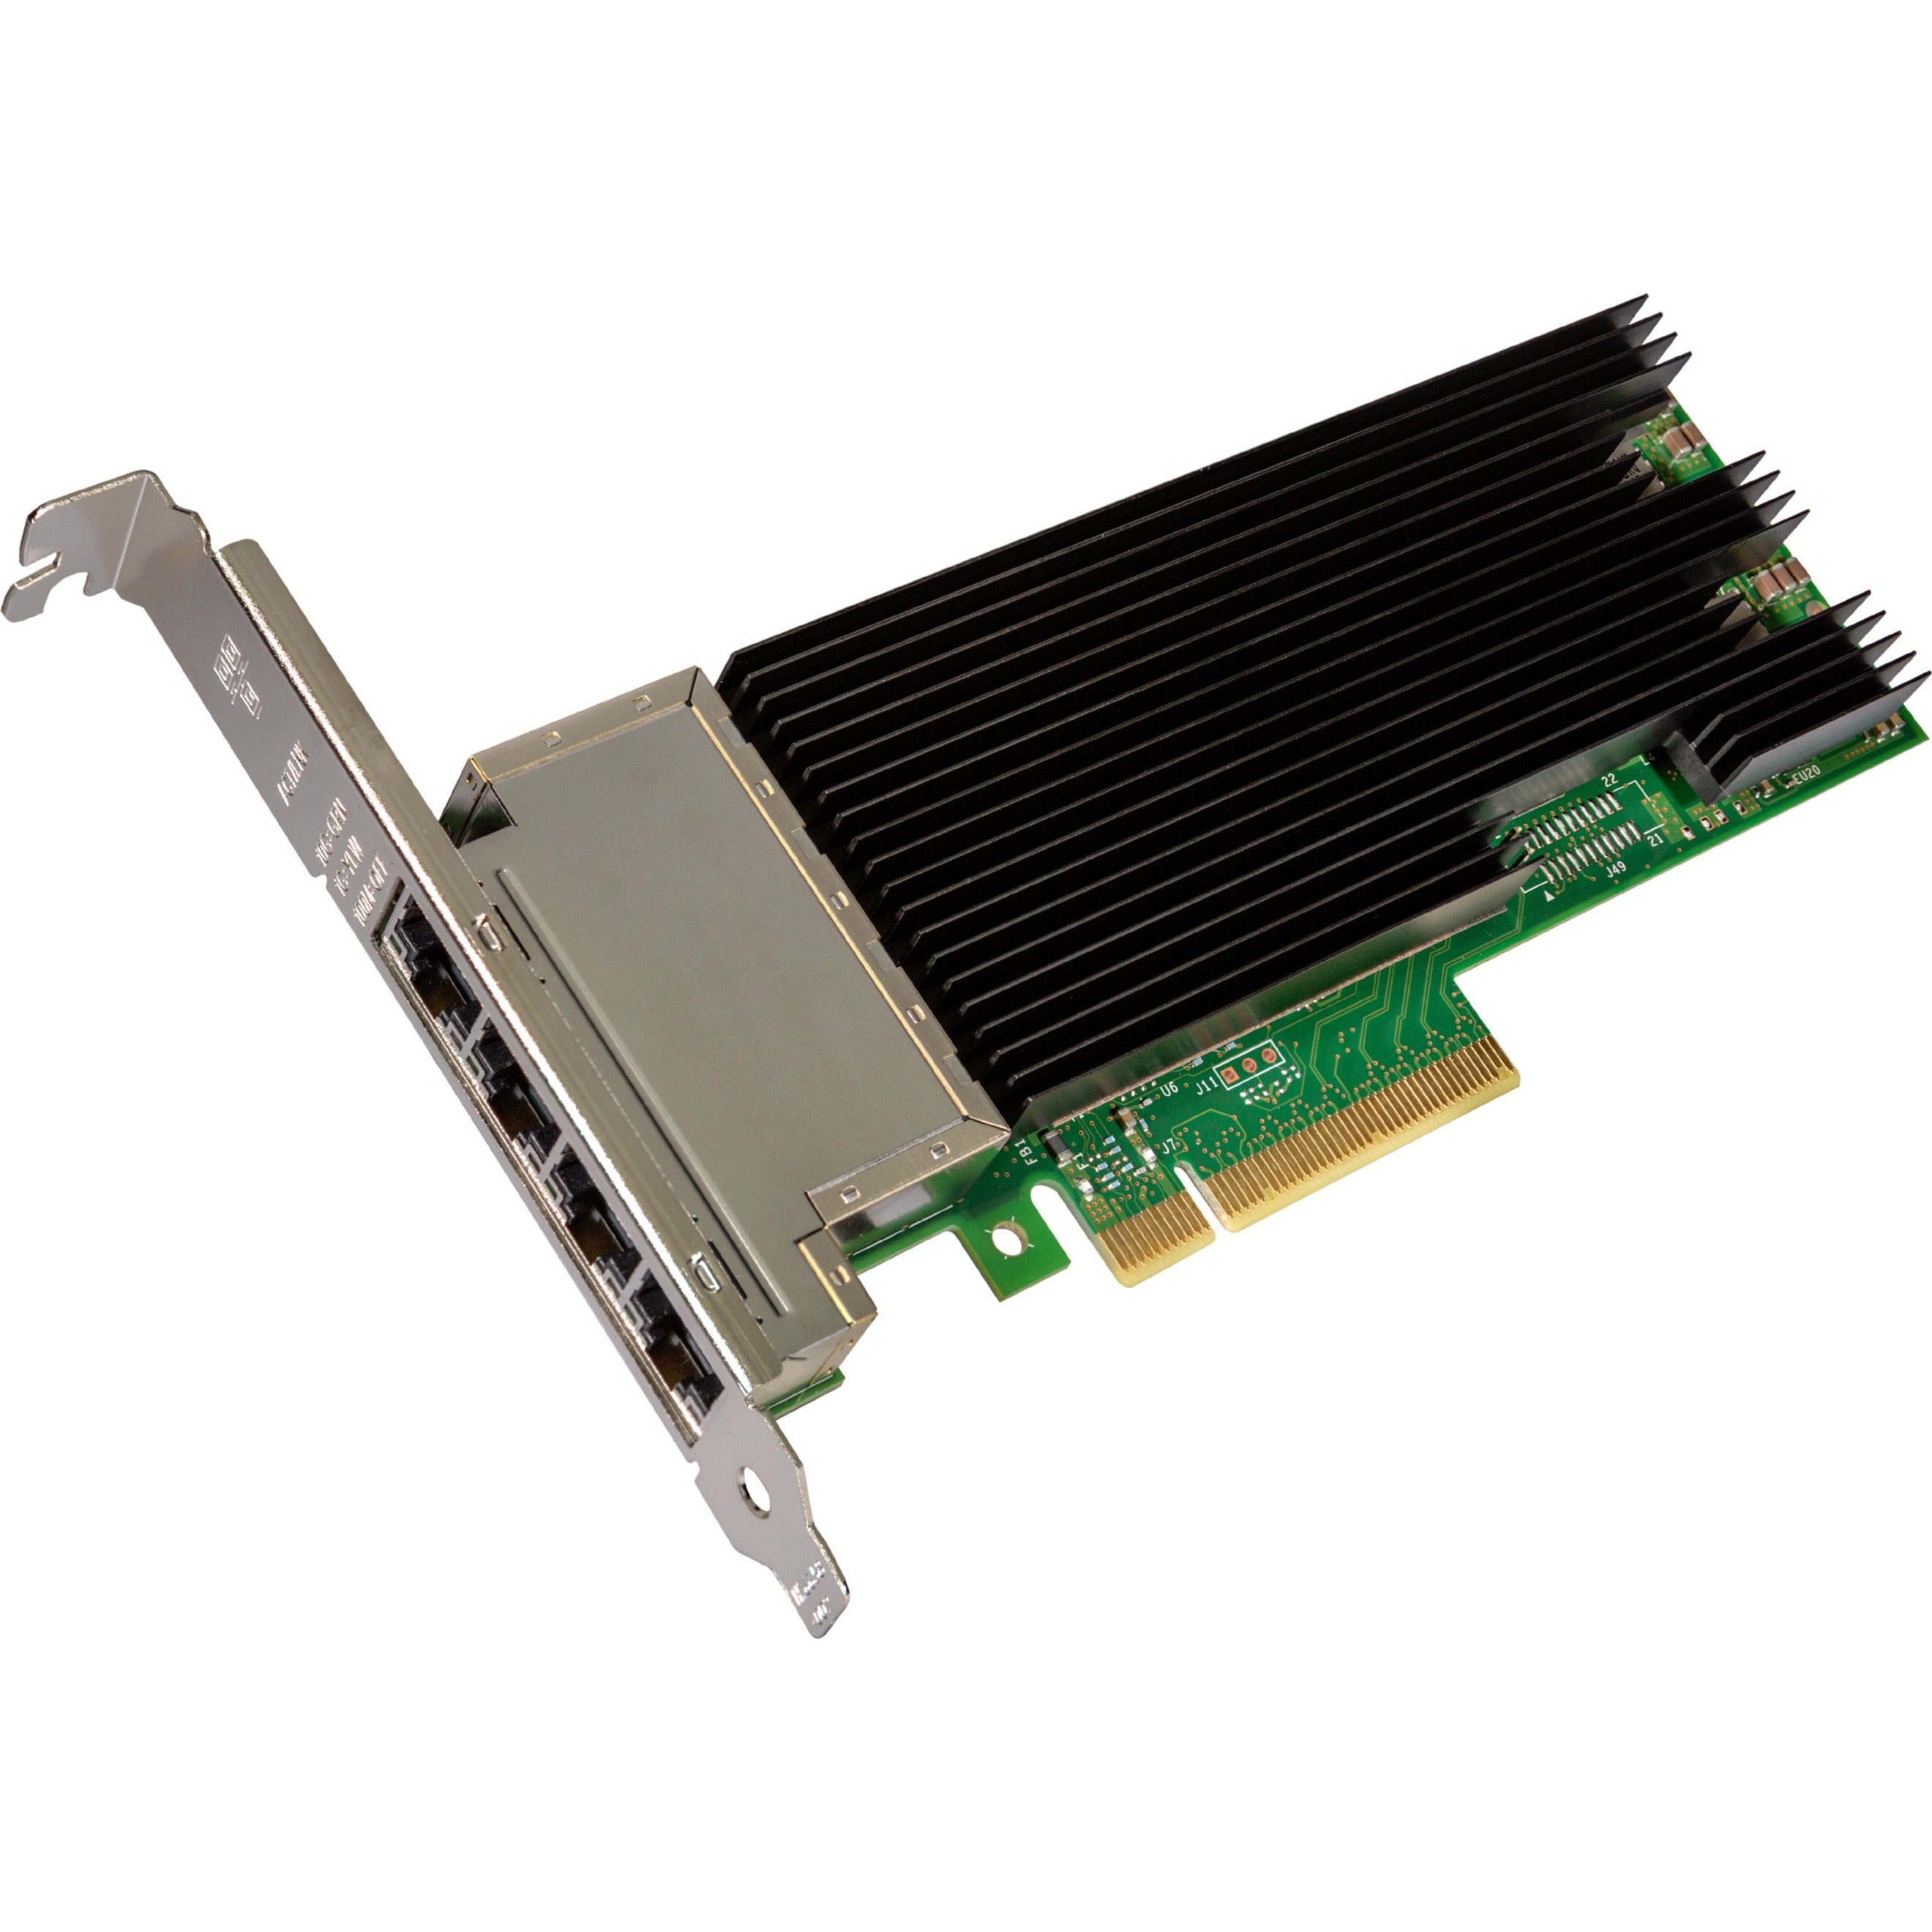 Intel Ethernet Converged Network Adapter X710-T4 [Discontinued]